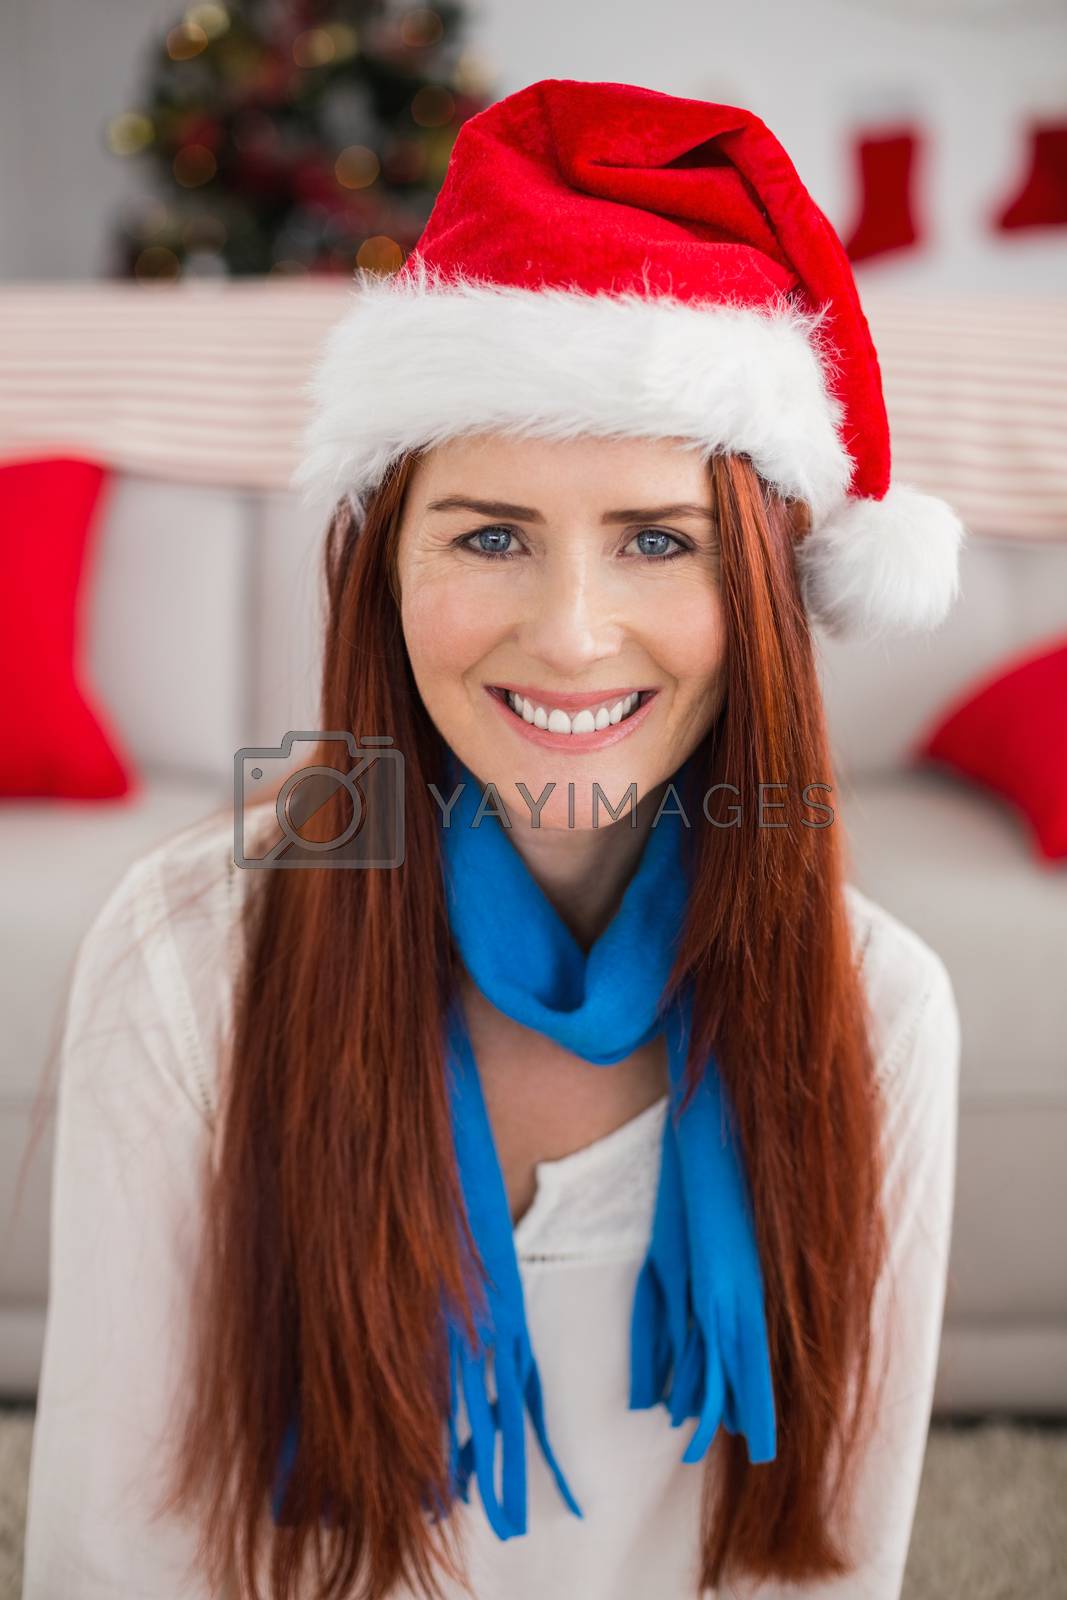 Royalty free image of Festive redhead smiling at camera by Wavebreakmedia